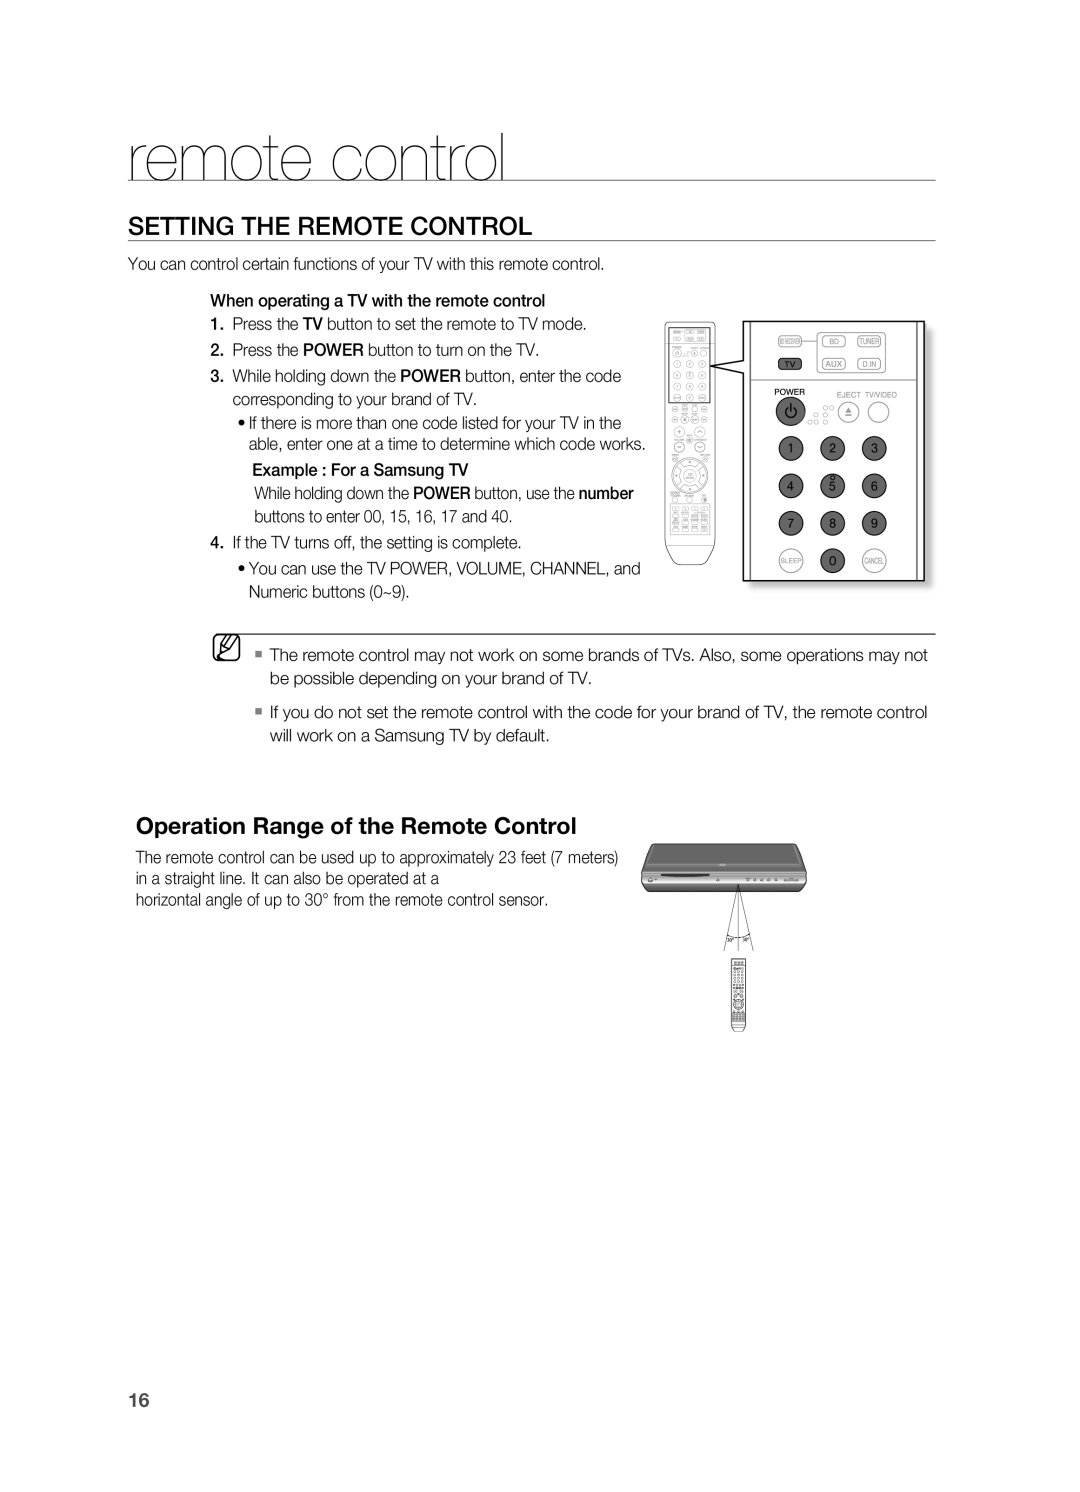 Samsung HT-BD2 manual Setting The Remote Control, Operation Range of the Remote Control, remote control 